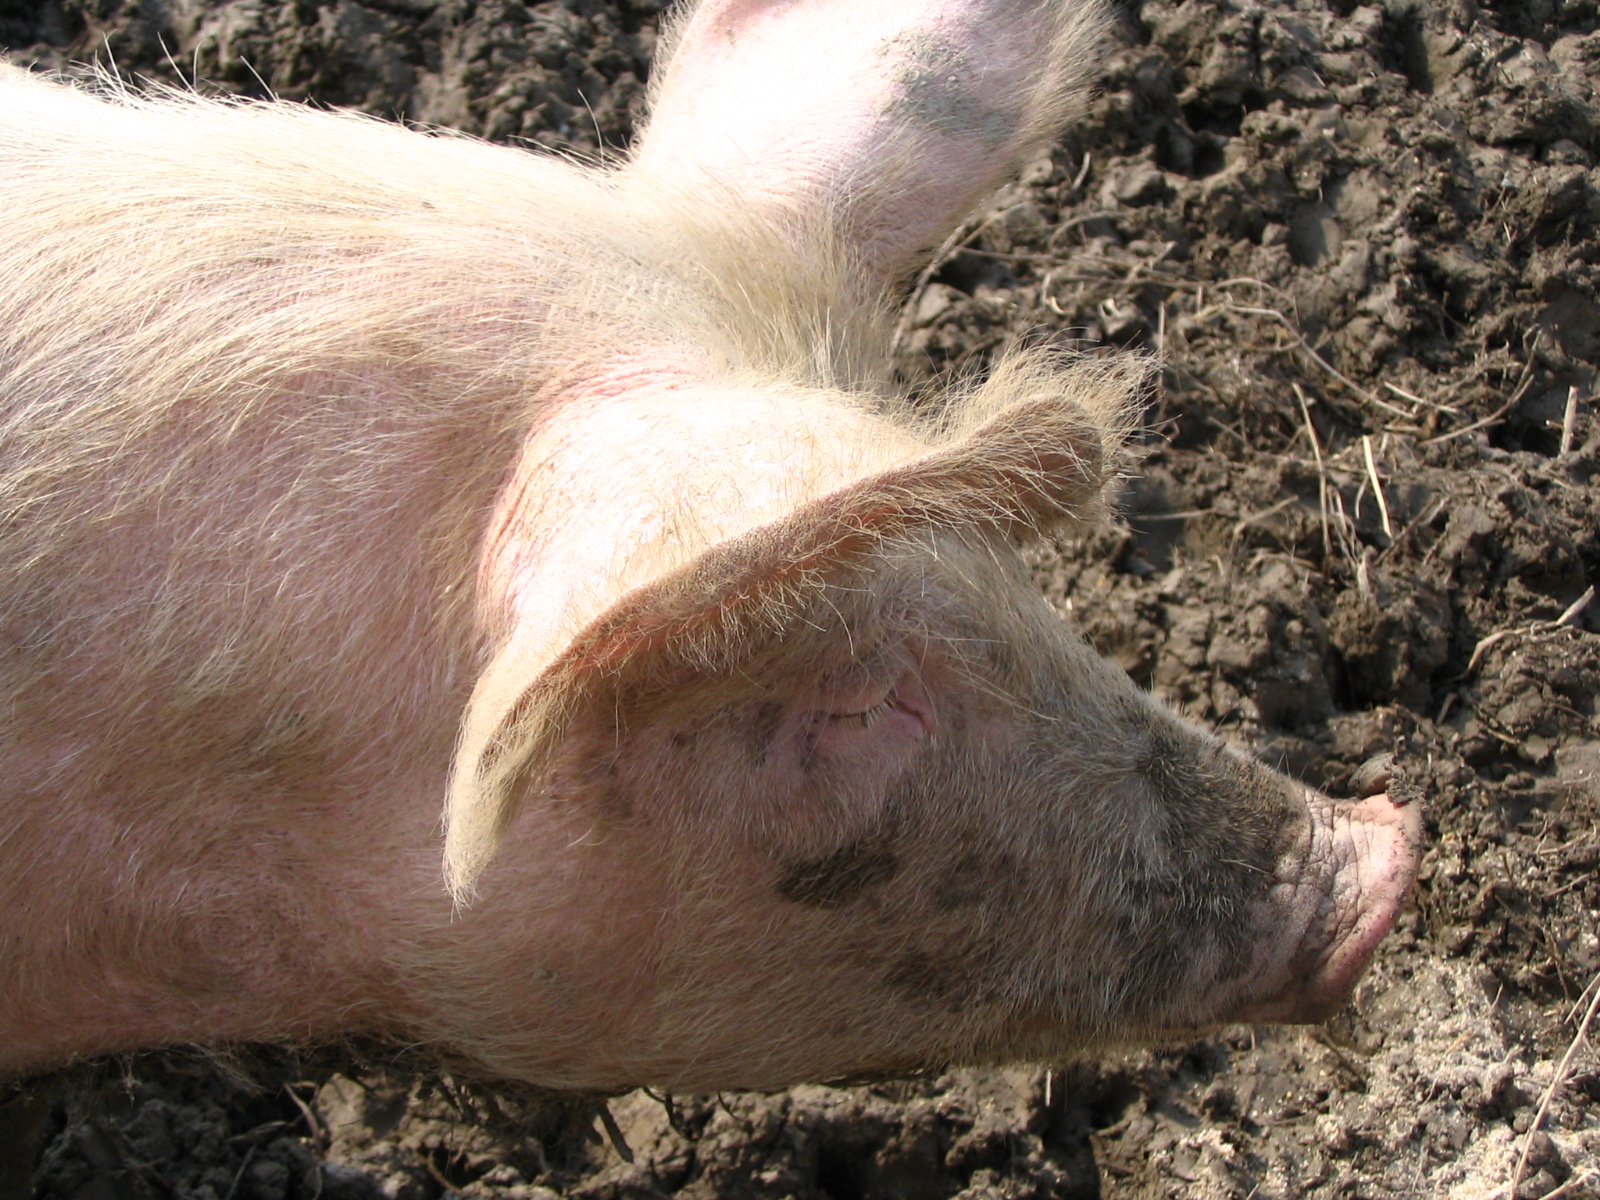 a pig laying in the dirt looking towards the camera